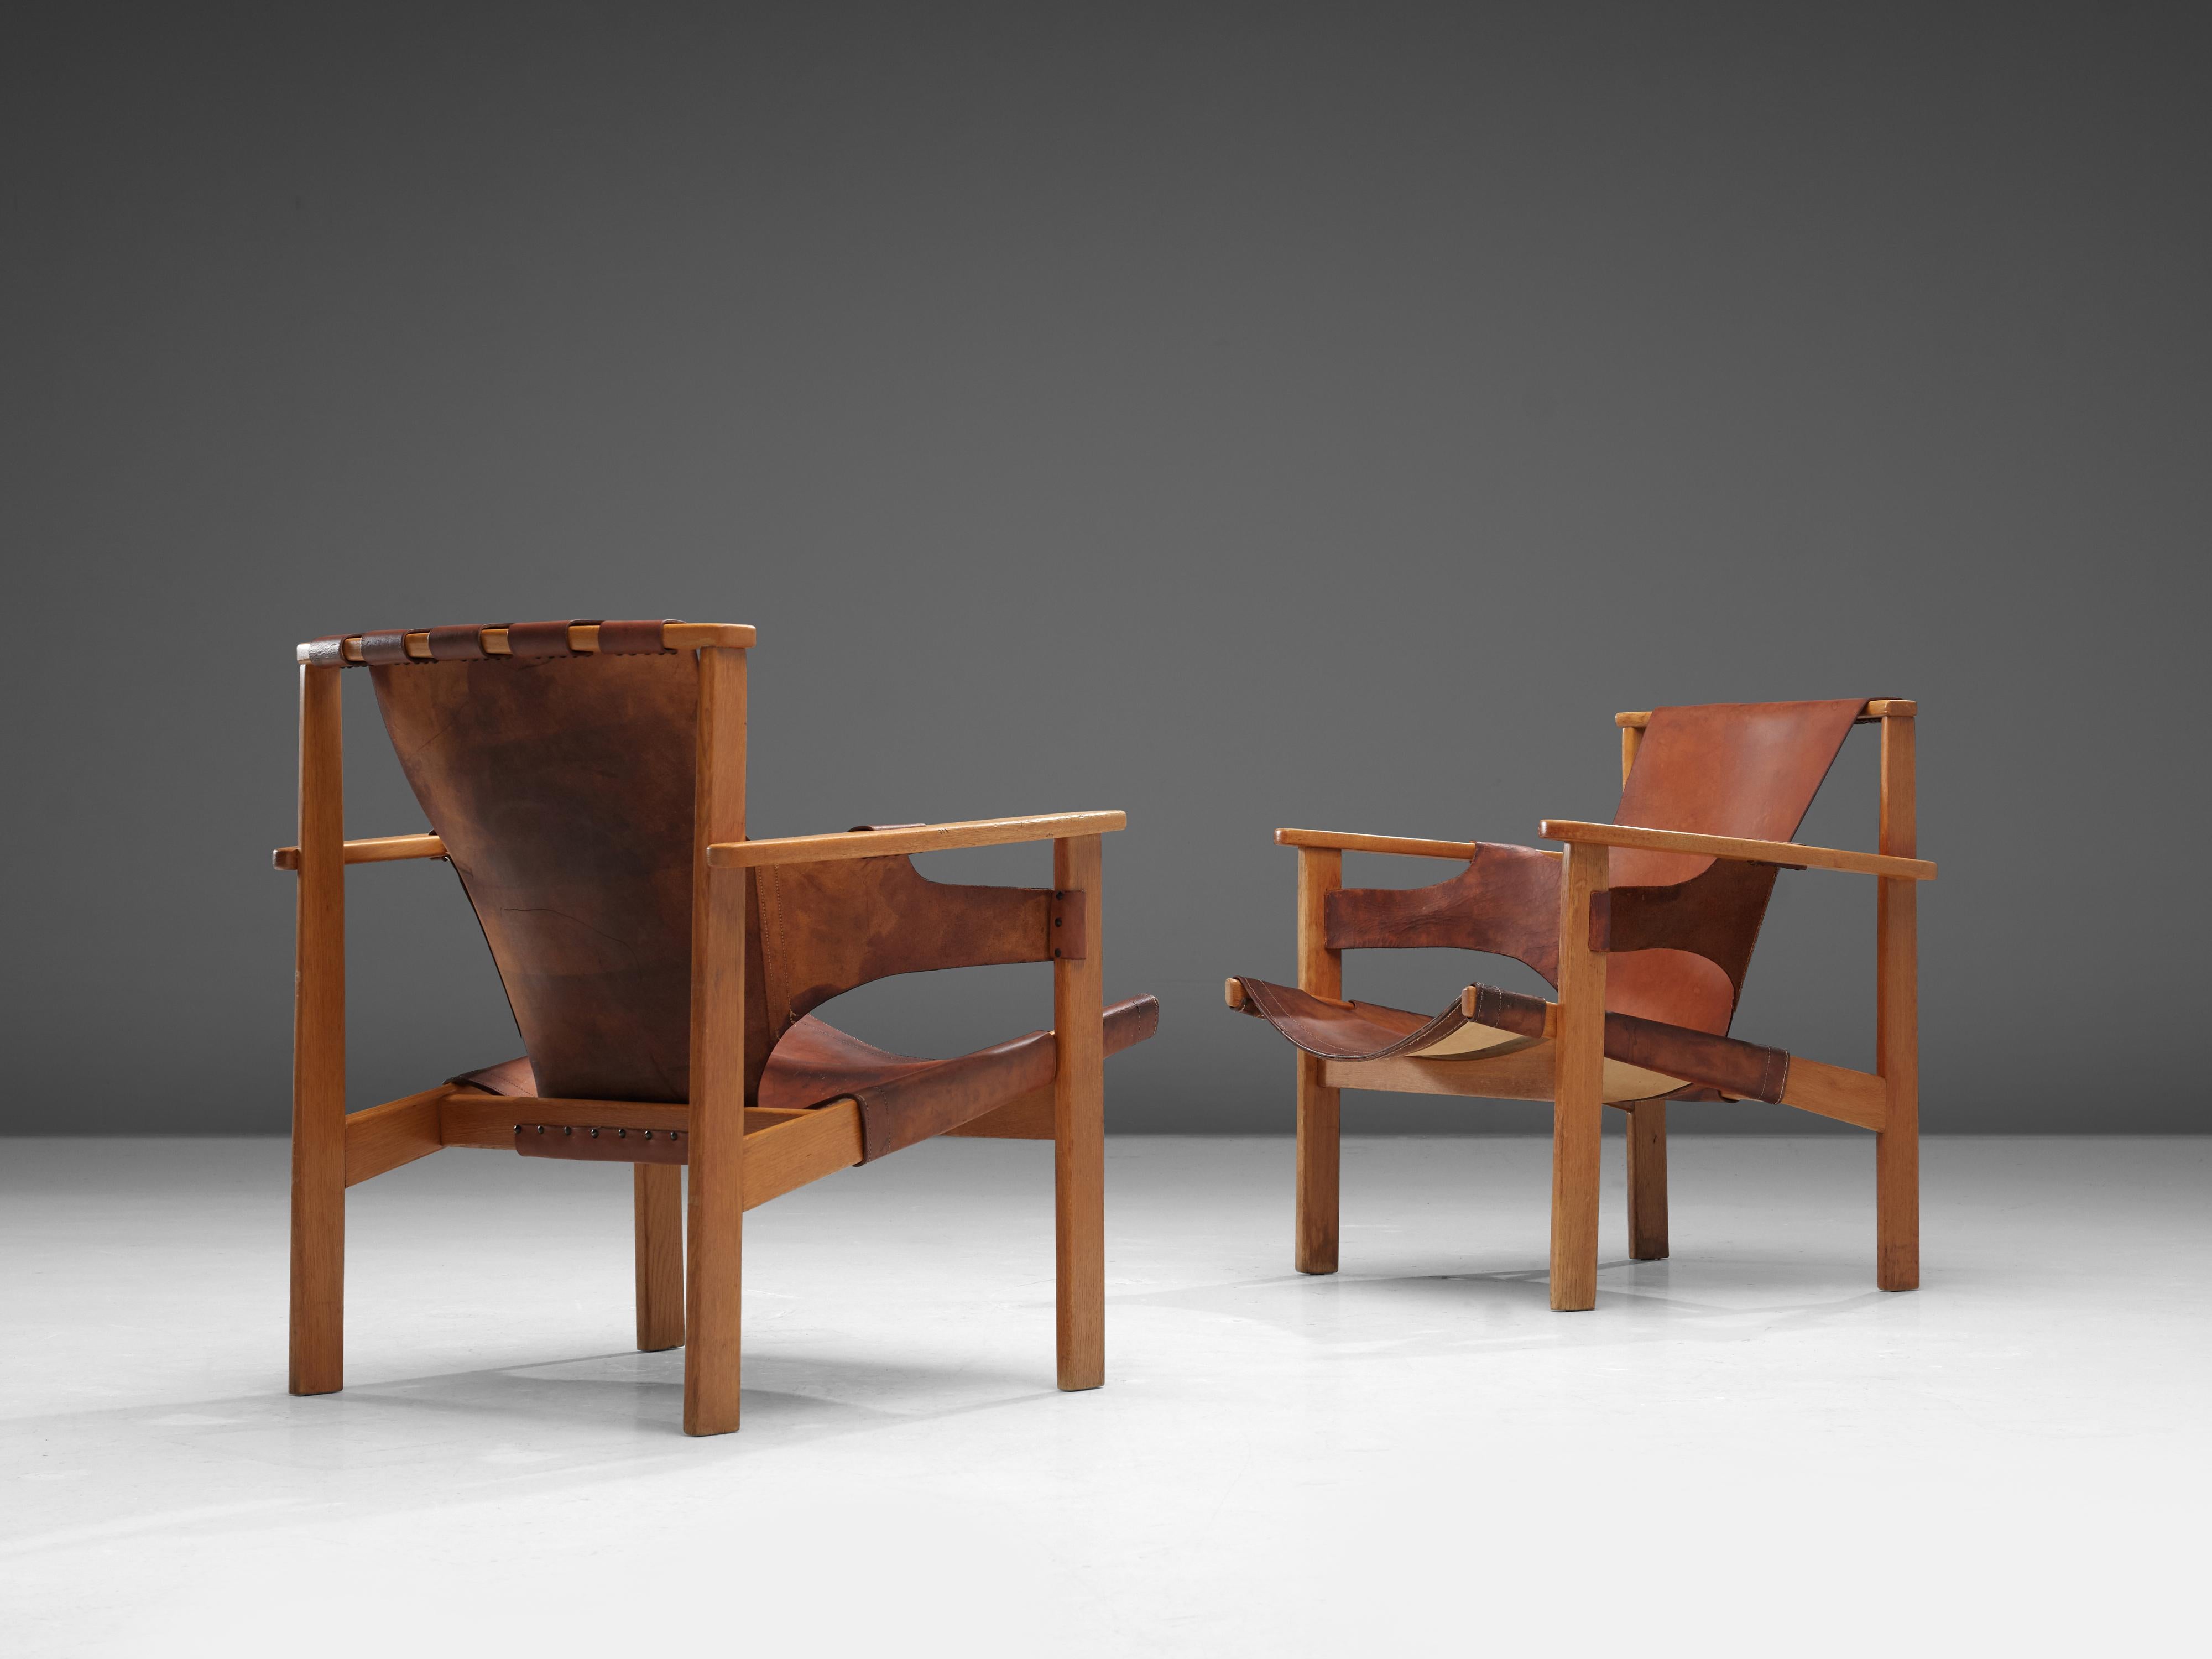 Carl-Axel Acking for Nordiska Kompaniet, 'Trienna' chairs, stained oak, leather, Sweden, 1957

These characteristic lounge chairs are designed by the Swedish architect and furniture designer Carl-Axel Acking in 1957 and produced by Nordiska